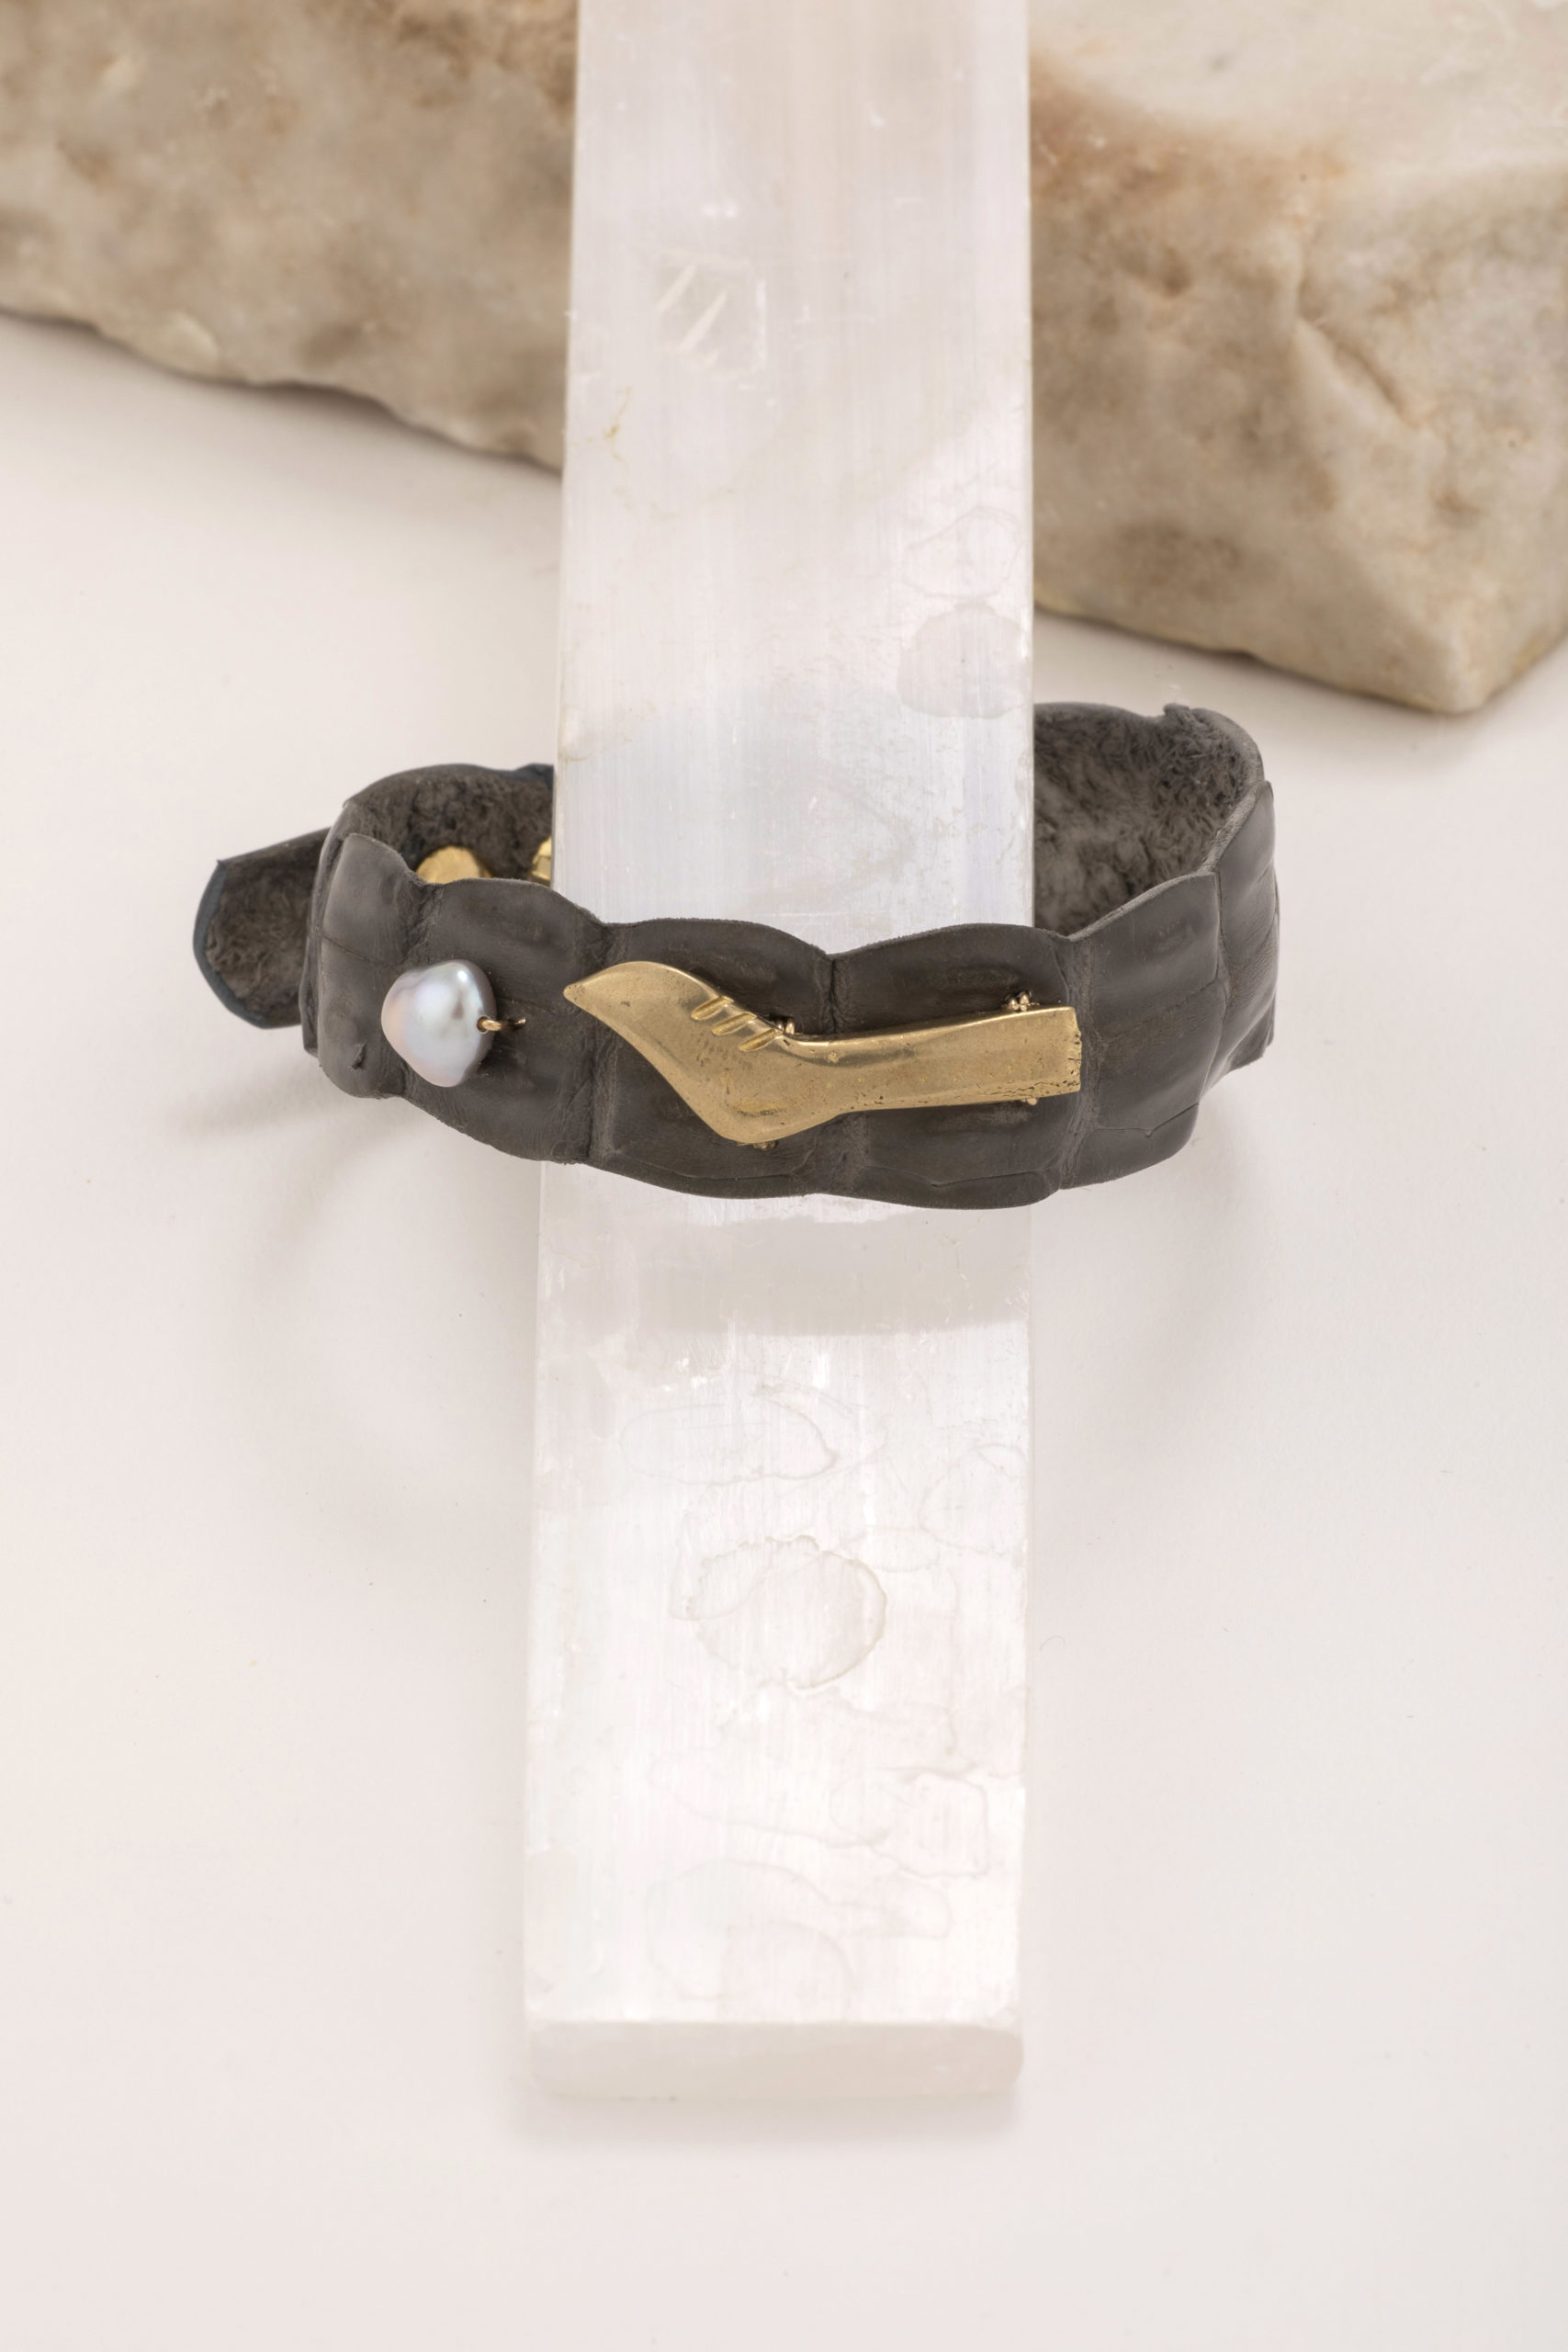 Featured image for “Passerine Leather Bracelet”